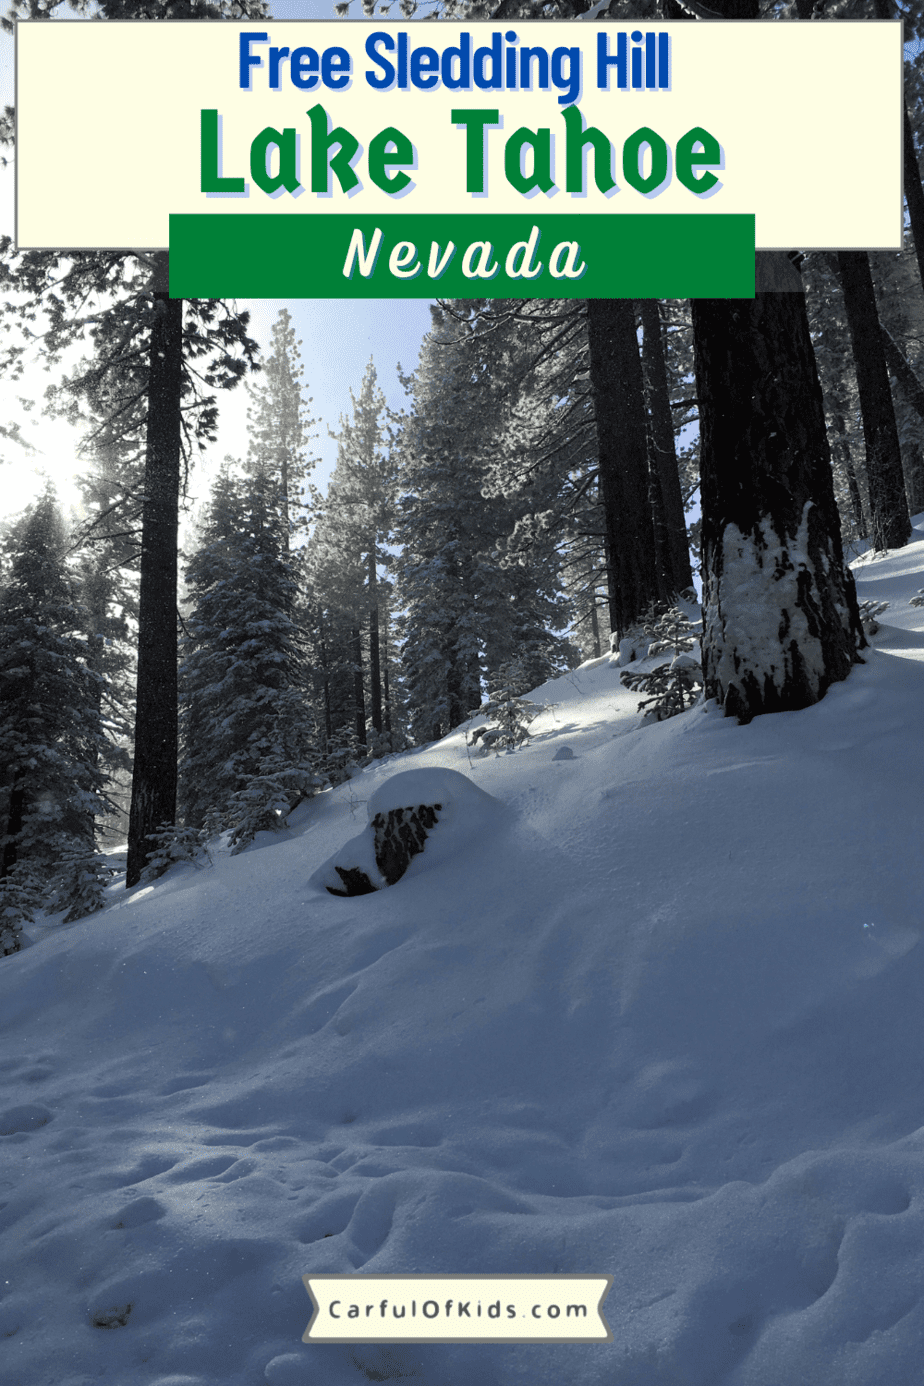 Kids love Sledding and Adults love Free! Here's a secret sledding hill near Lake Tahoe and Carson City in Nevada that offers both. Where to take kids sledding in Lake Tahoe | Free Sledding Spot in Nevada  #LakeTahoe